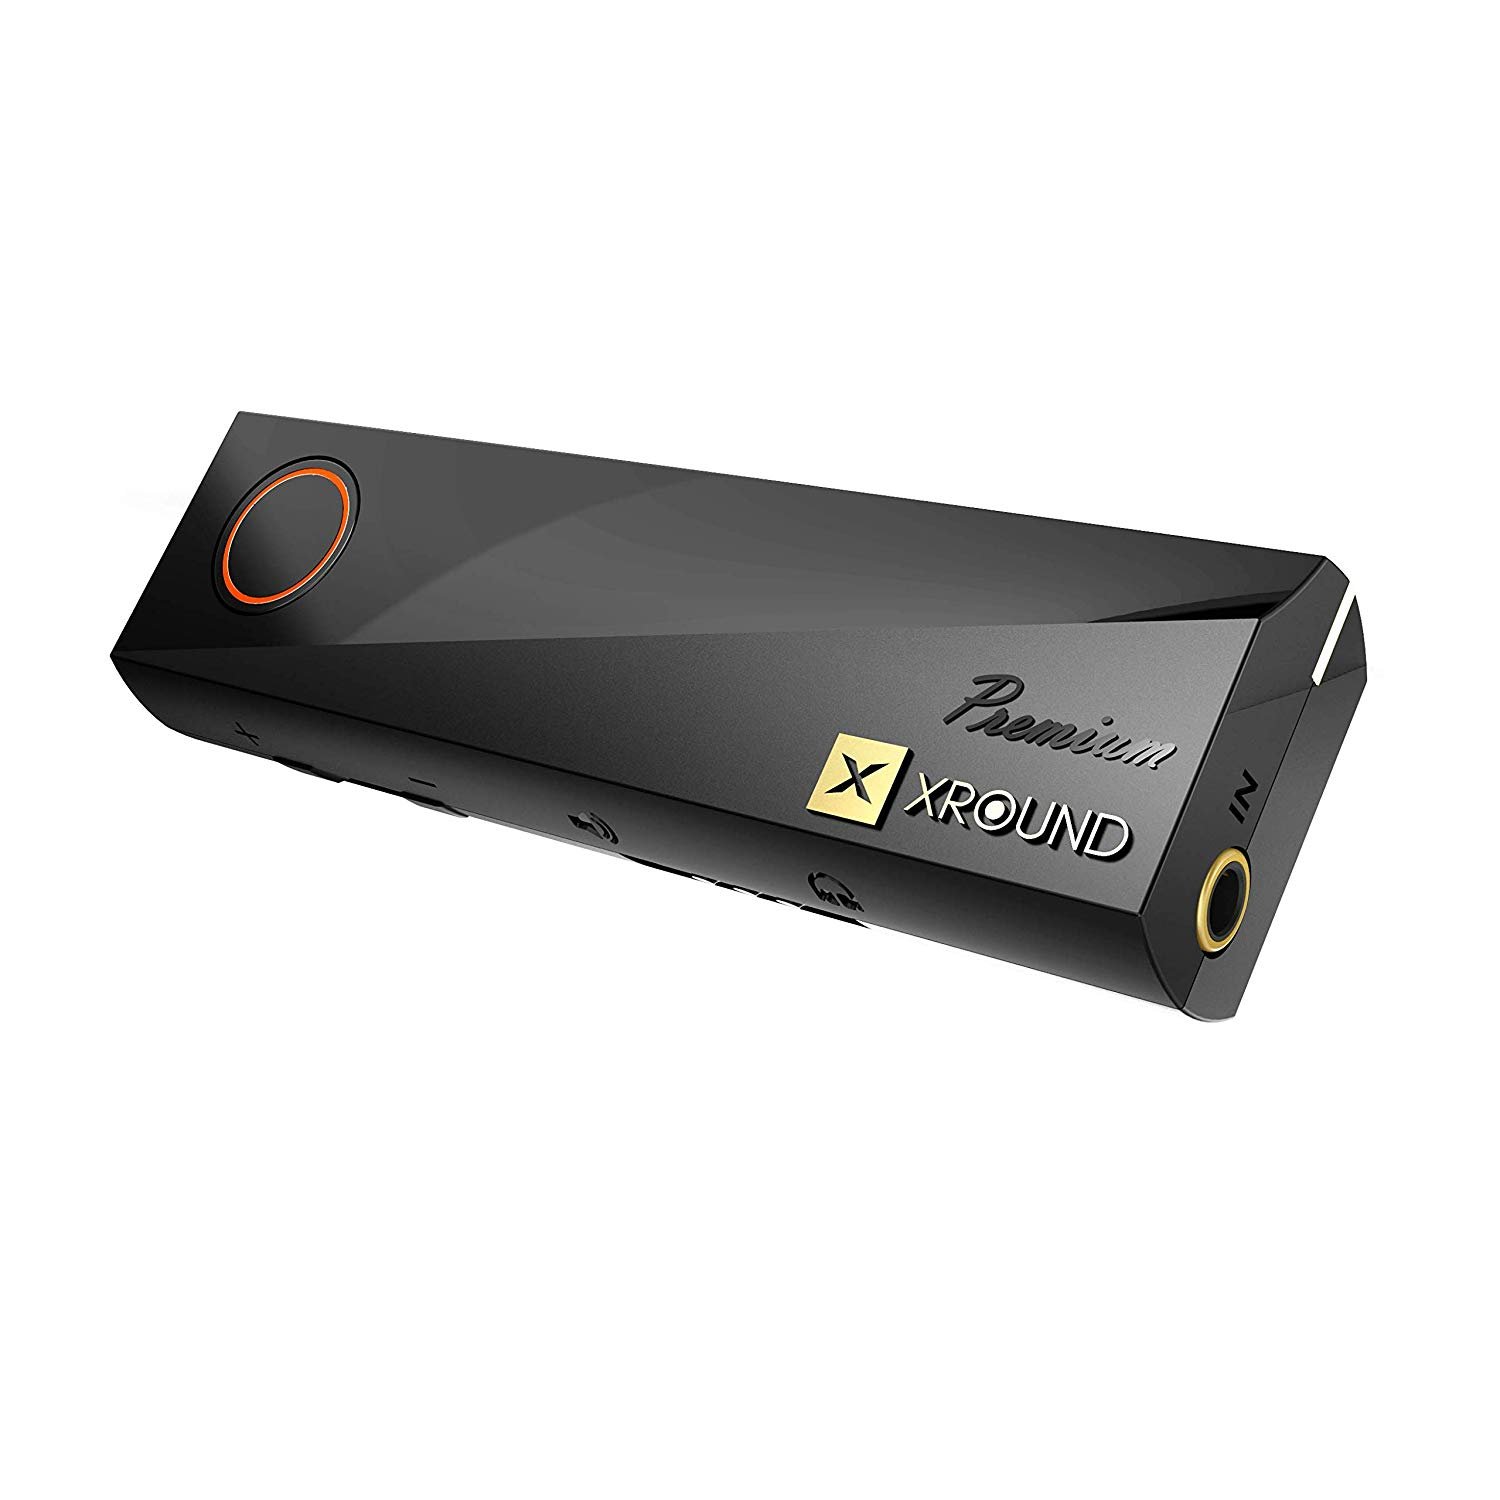 XPUMP Premium - 3D Audio External Sound Card, Portable Surround DAC for Headphone and Speaker. Smart DSP for The Ultimate Gaming, Music and Movies Lis 2